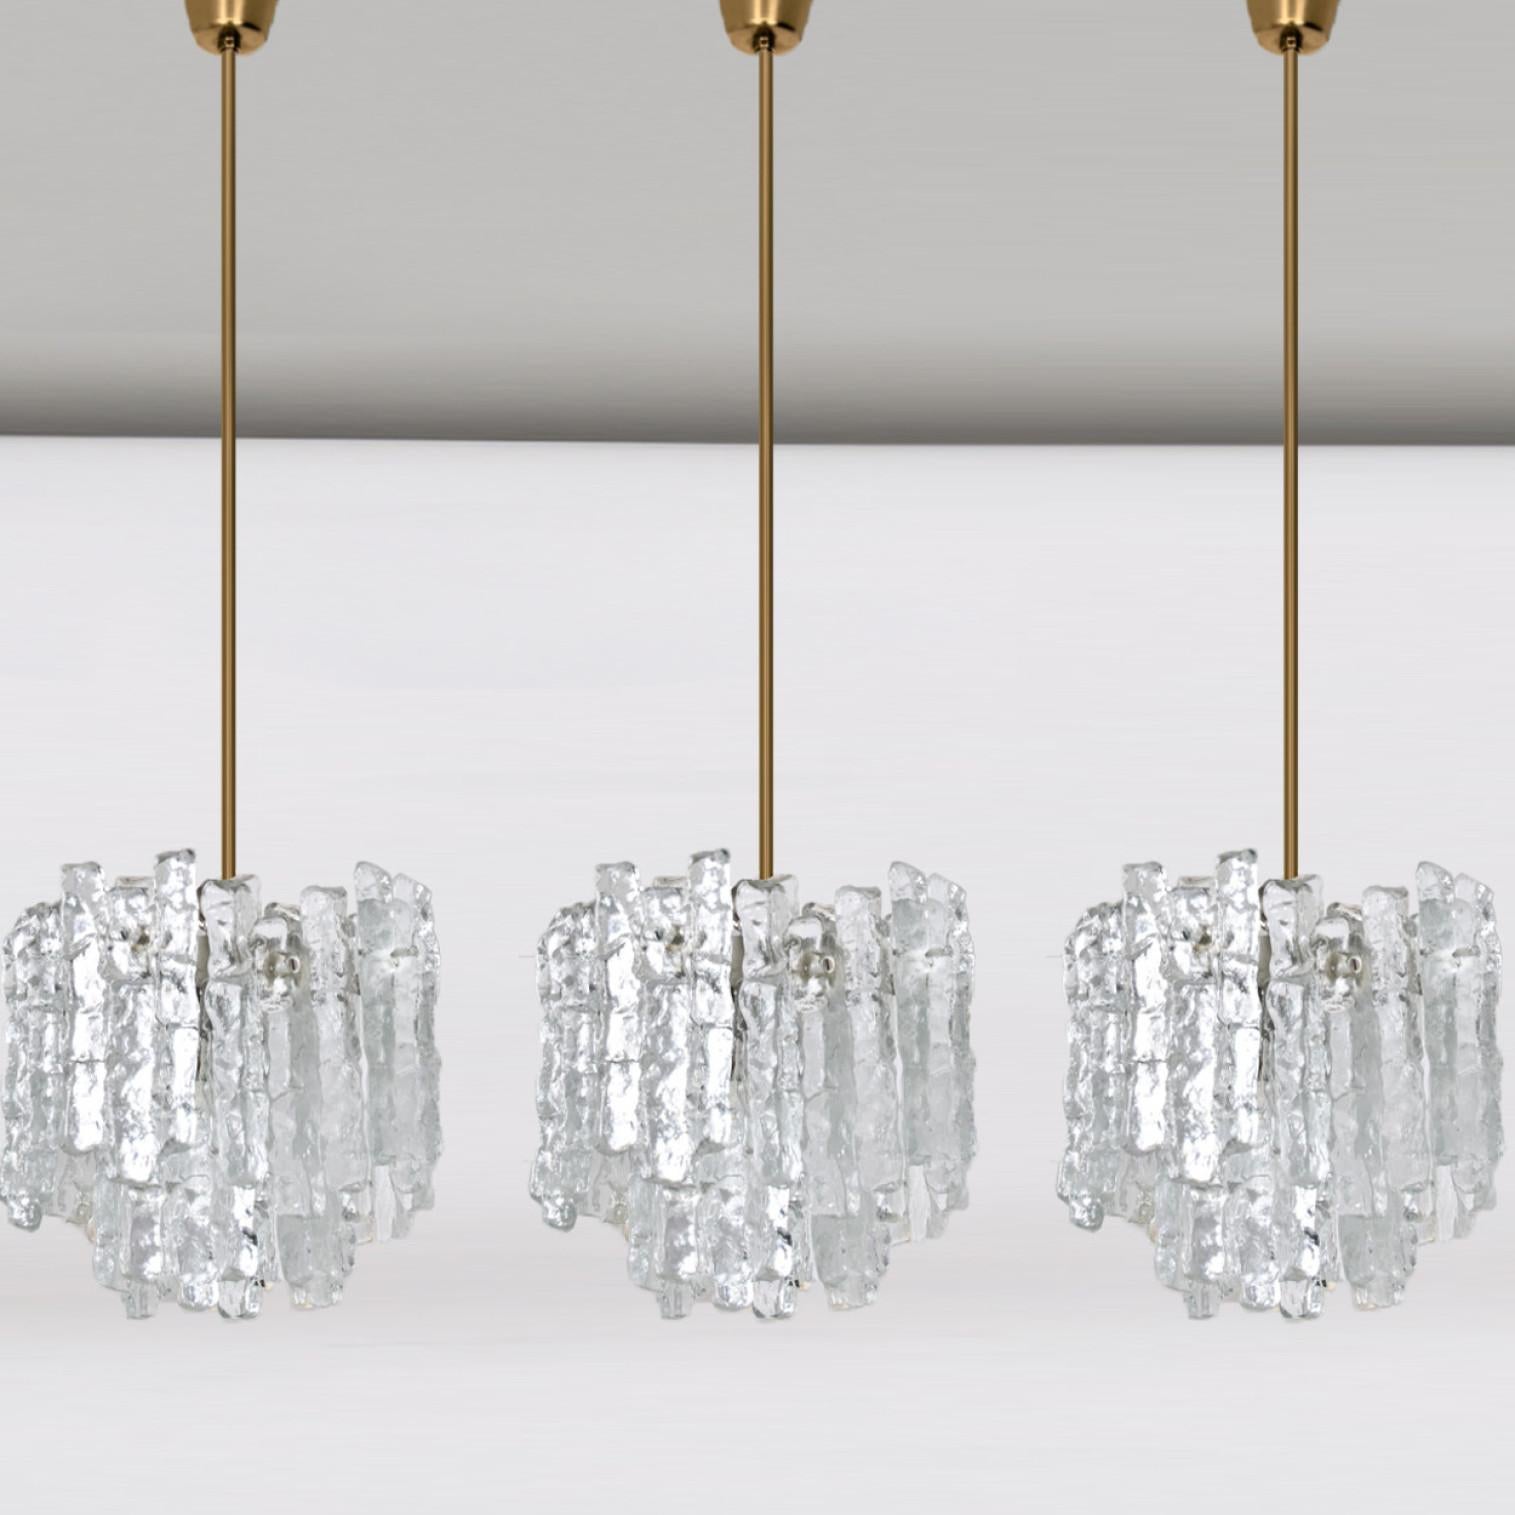 1 of the 3 beautiful and elegant modern chandeliers, manufactured by Kalmar Austria in the 1970s. Lovely design, each chandelier has 6 sockets and two layers of extremely stylish textured solid ice glass sheets (12 pieces) dangling on it.

Pleas